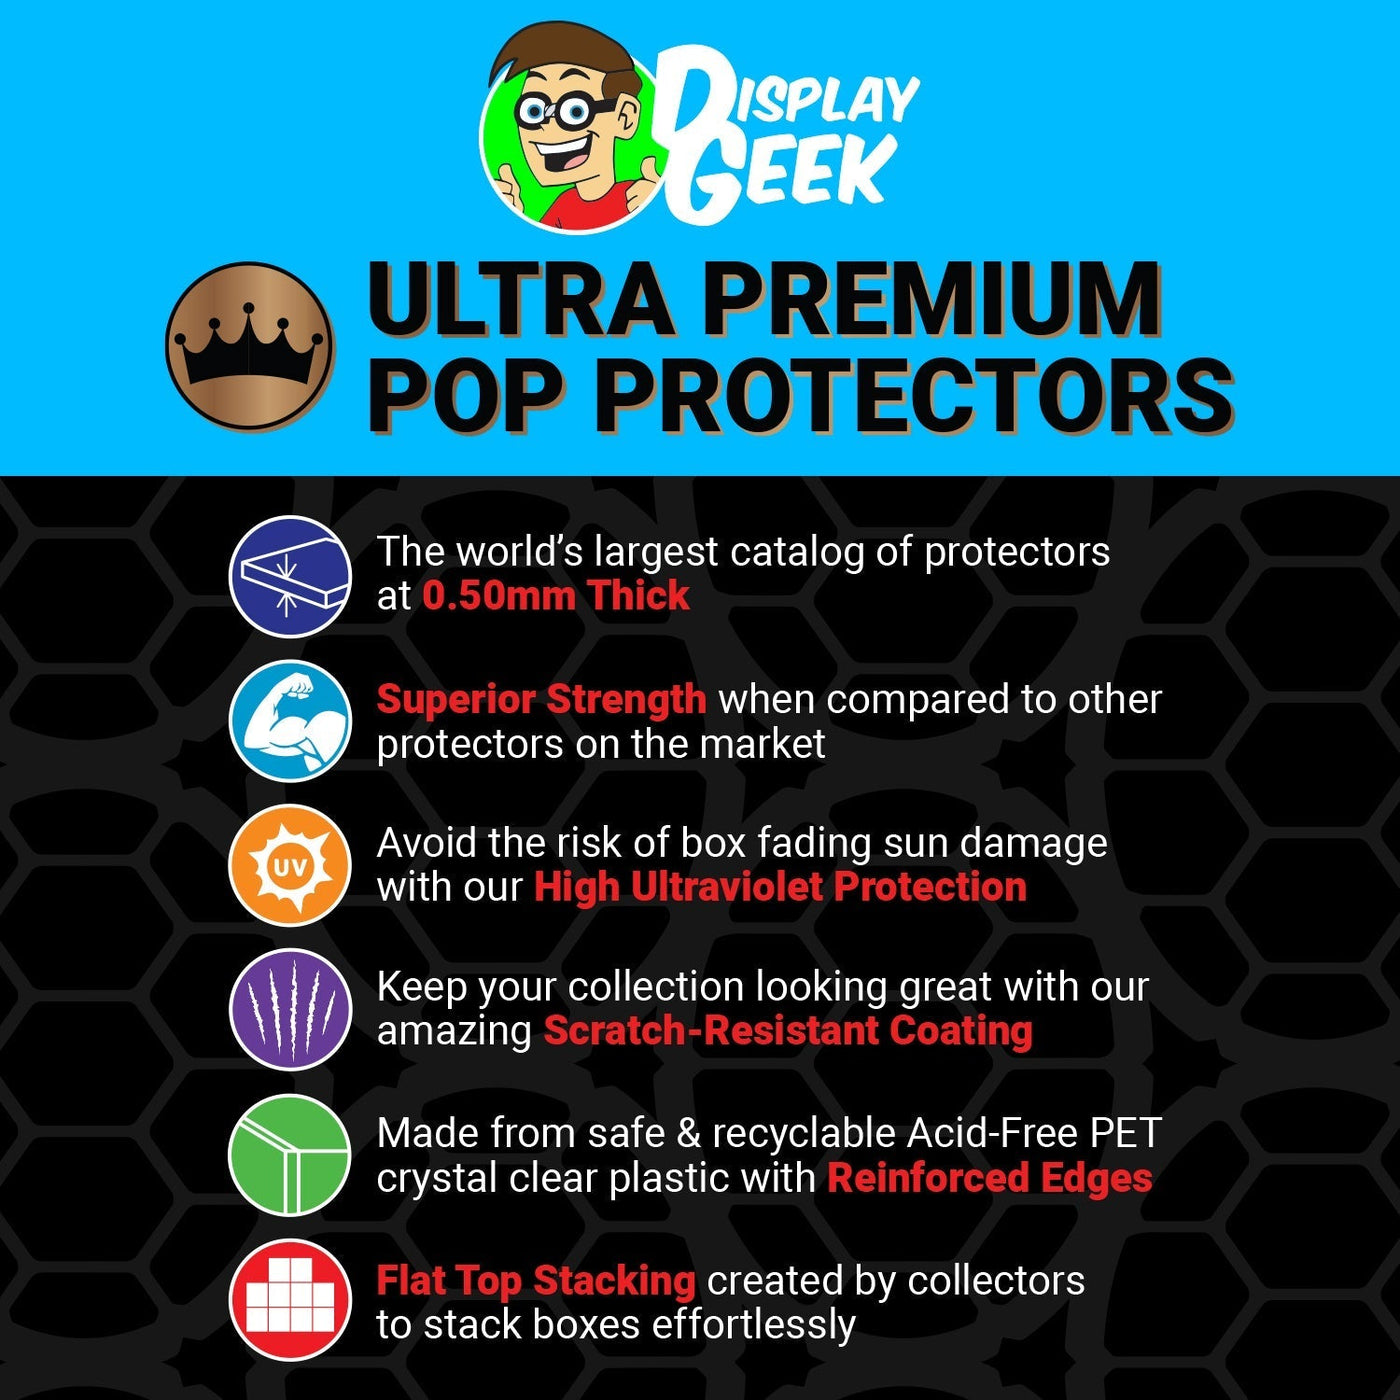 Pop Protector for Michael Jackson Thriller #33 Funko Pop Albums on The Protector Guide App by Display Geek